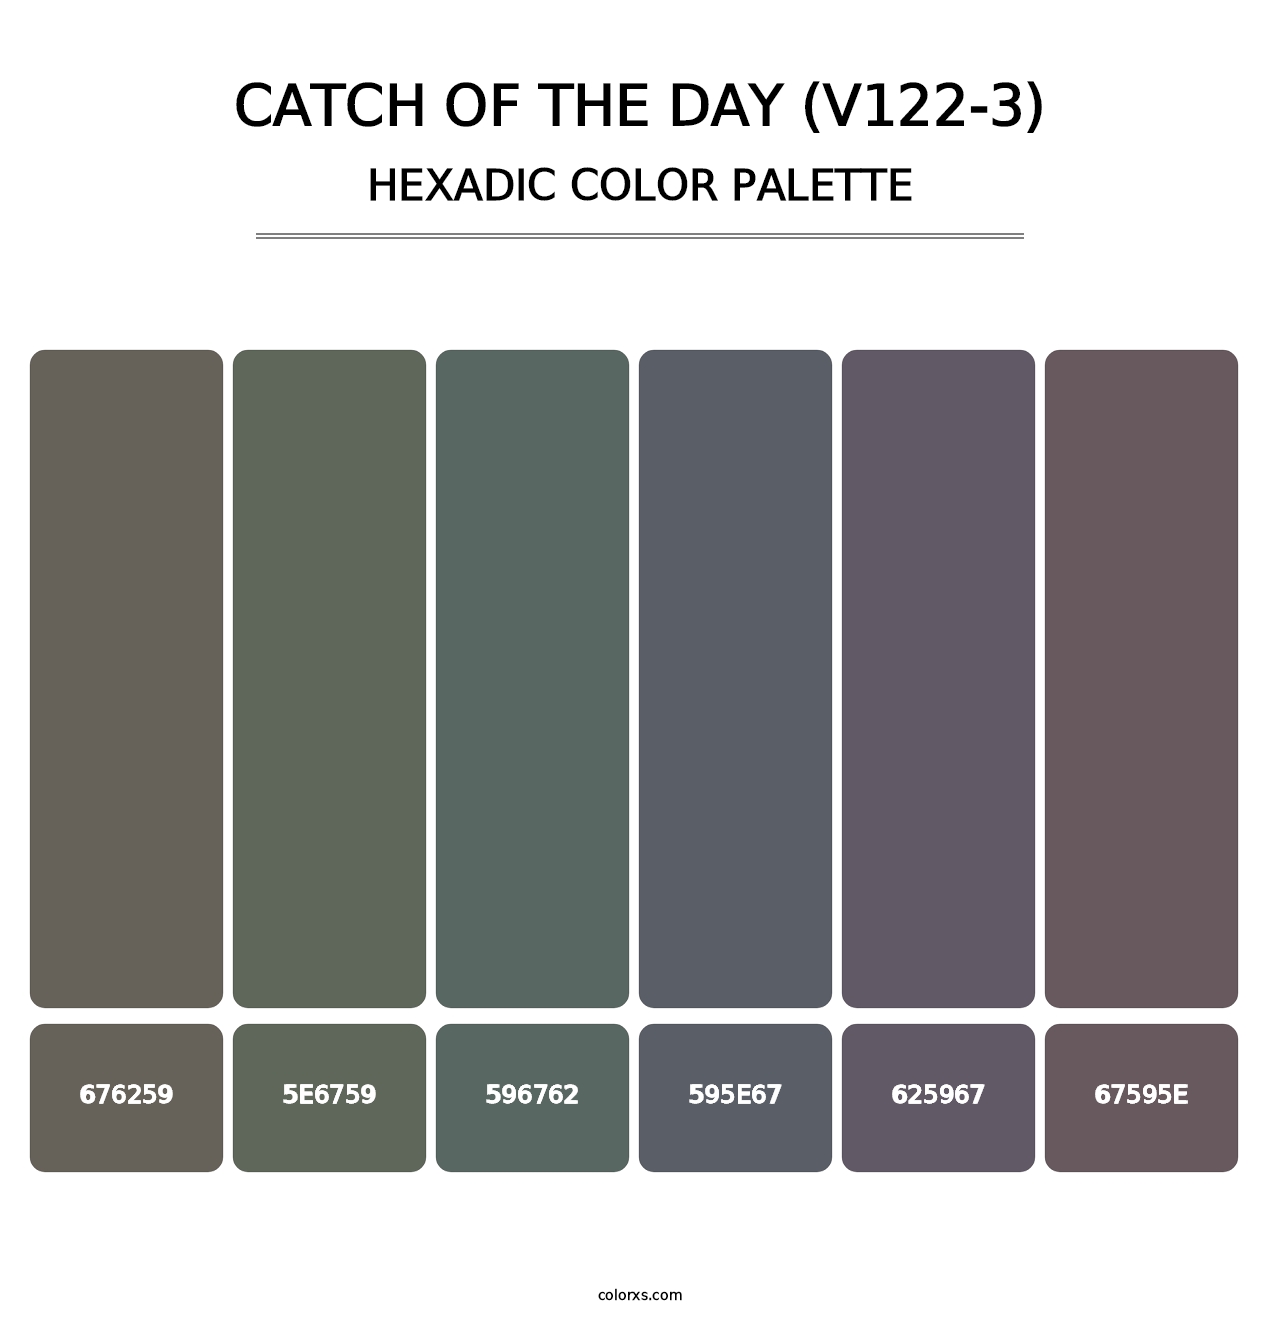 Catch of the Day (V122-3) - Hexadic Color Palette